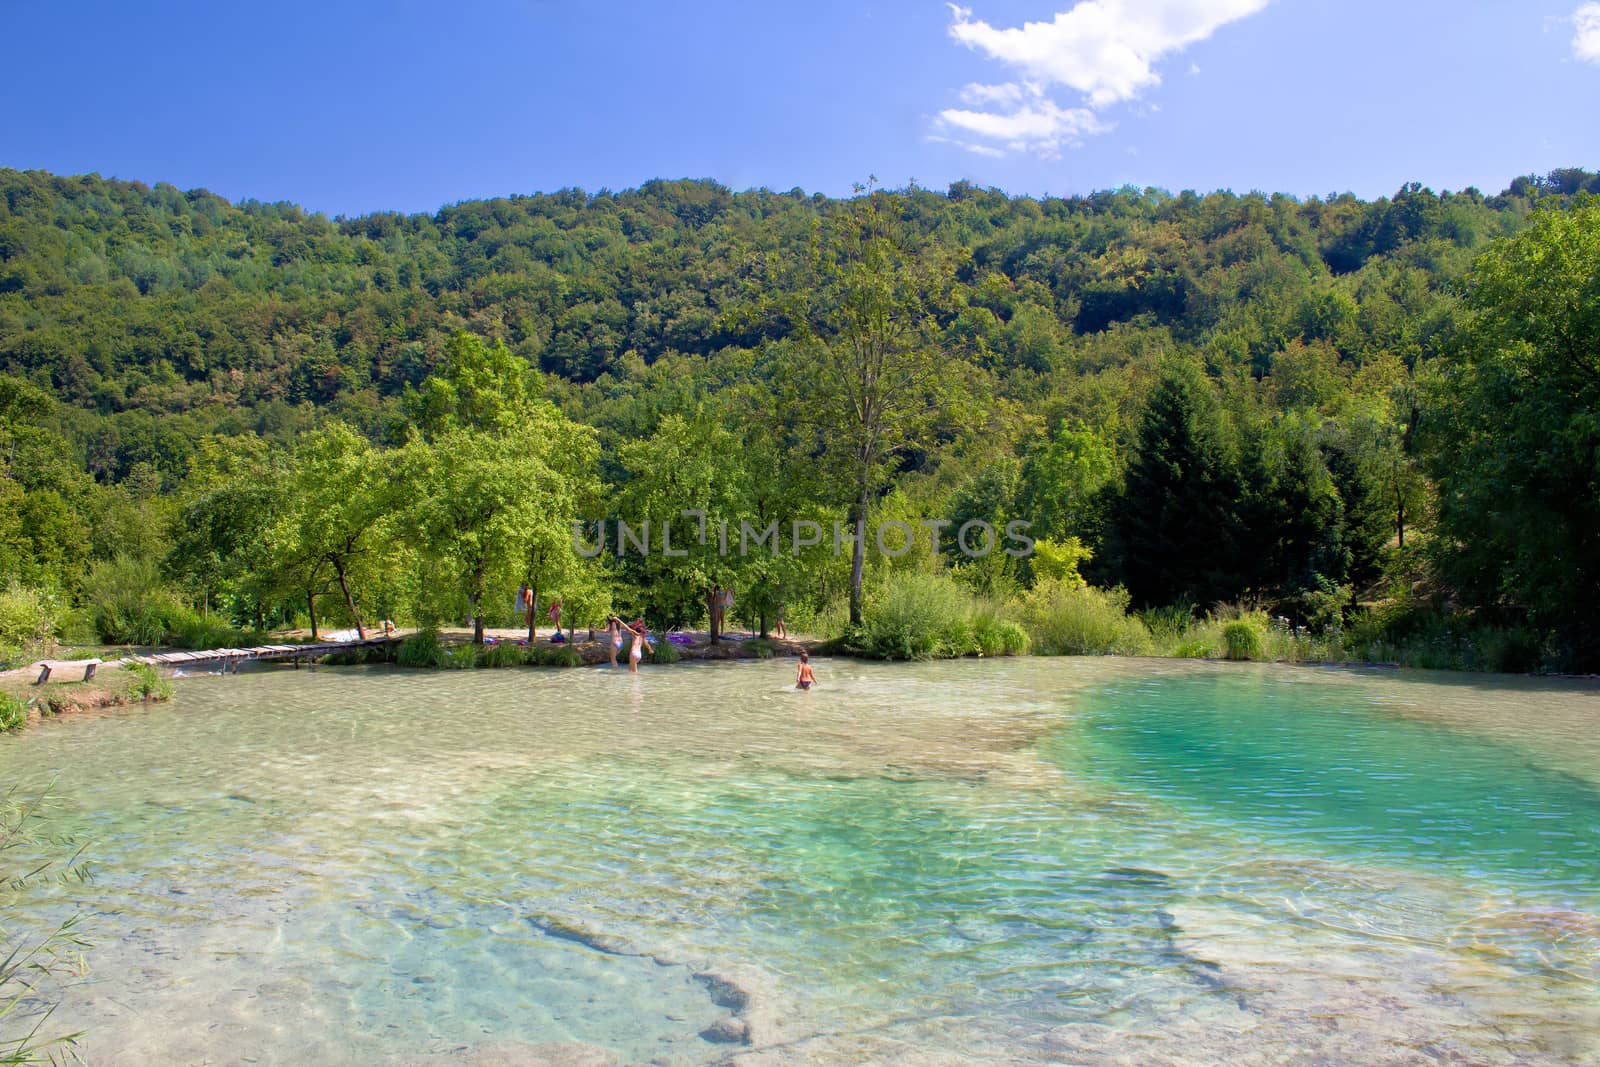 Children enjoying pure waters of Plitvice lakes National park in Croatia